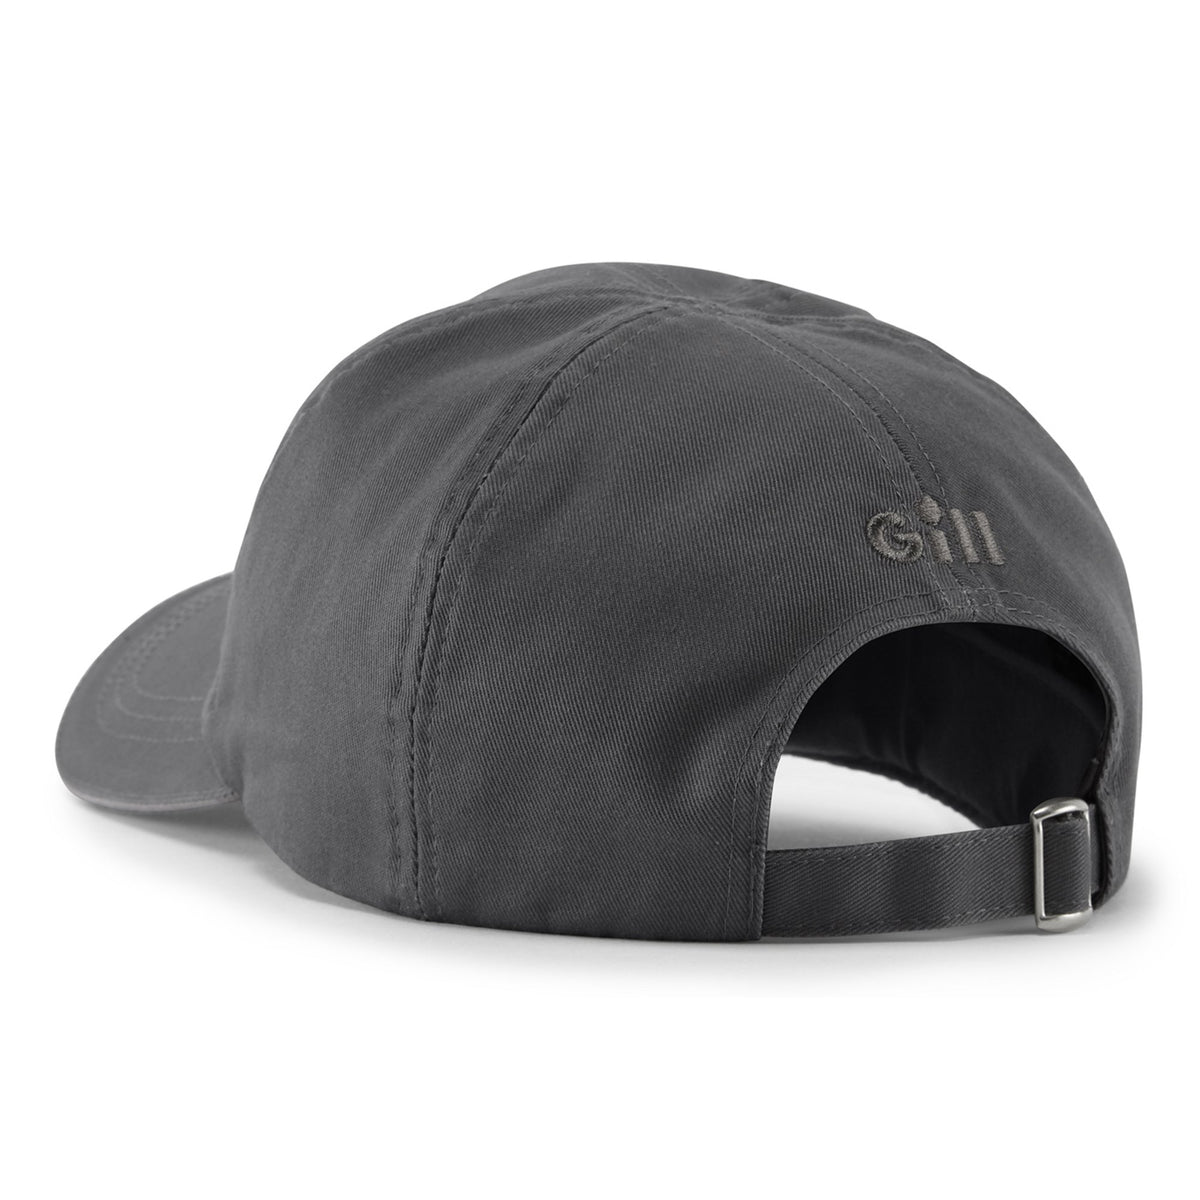 GILL Marine Hat - One Size